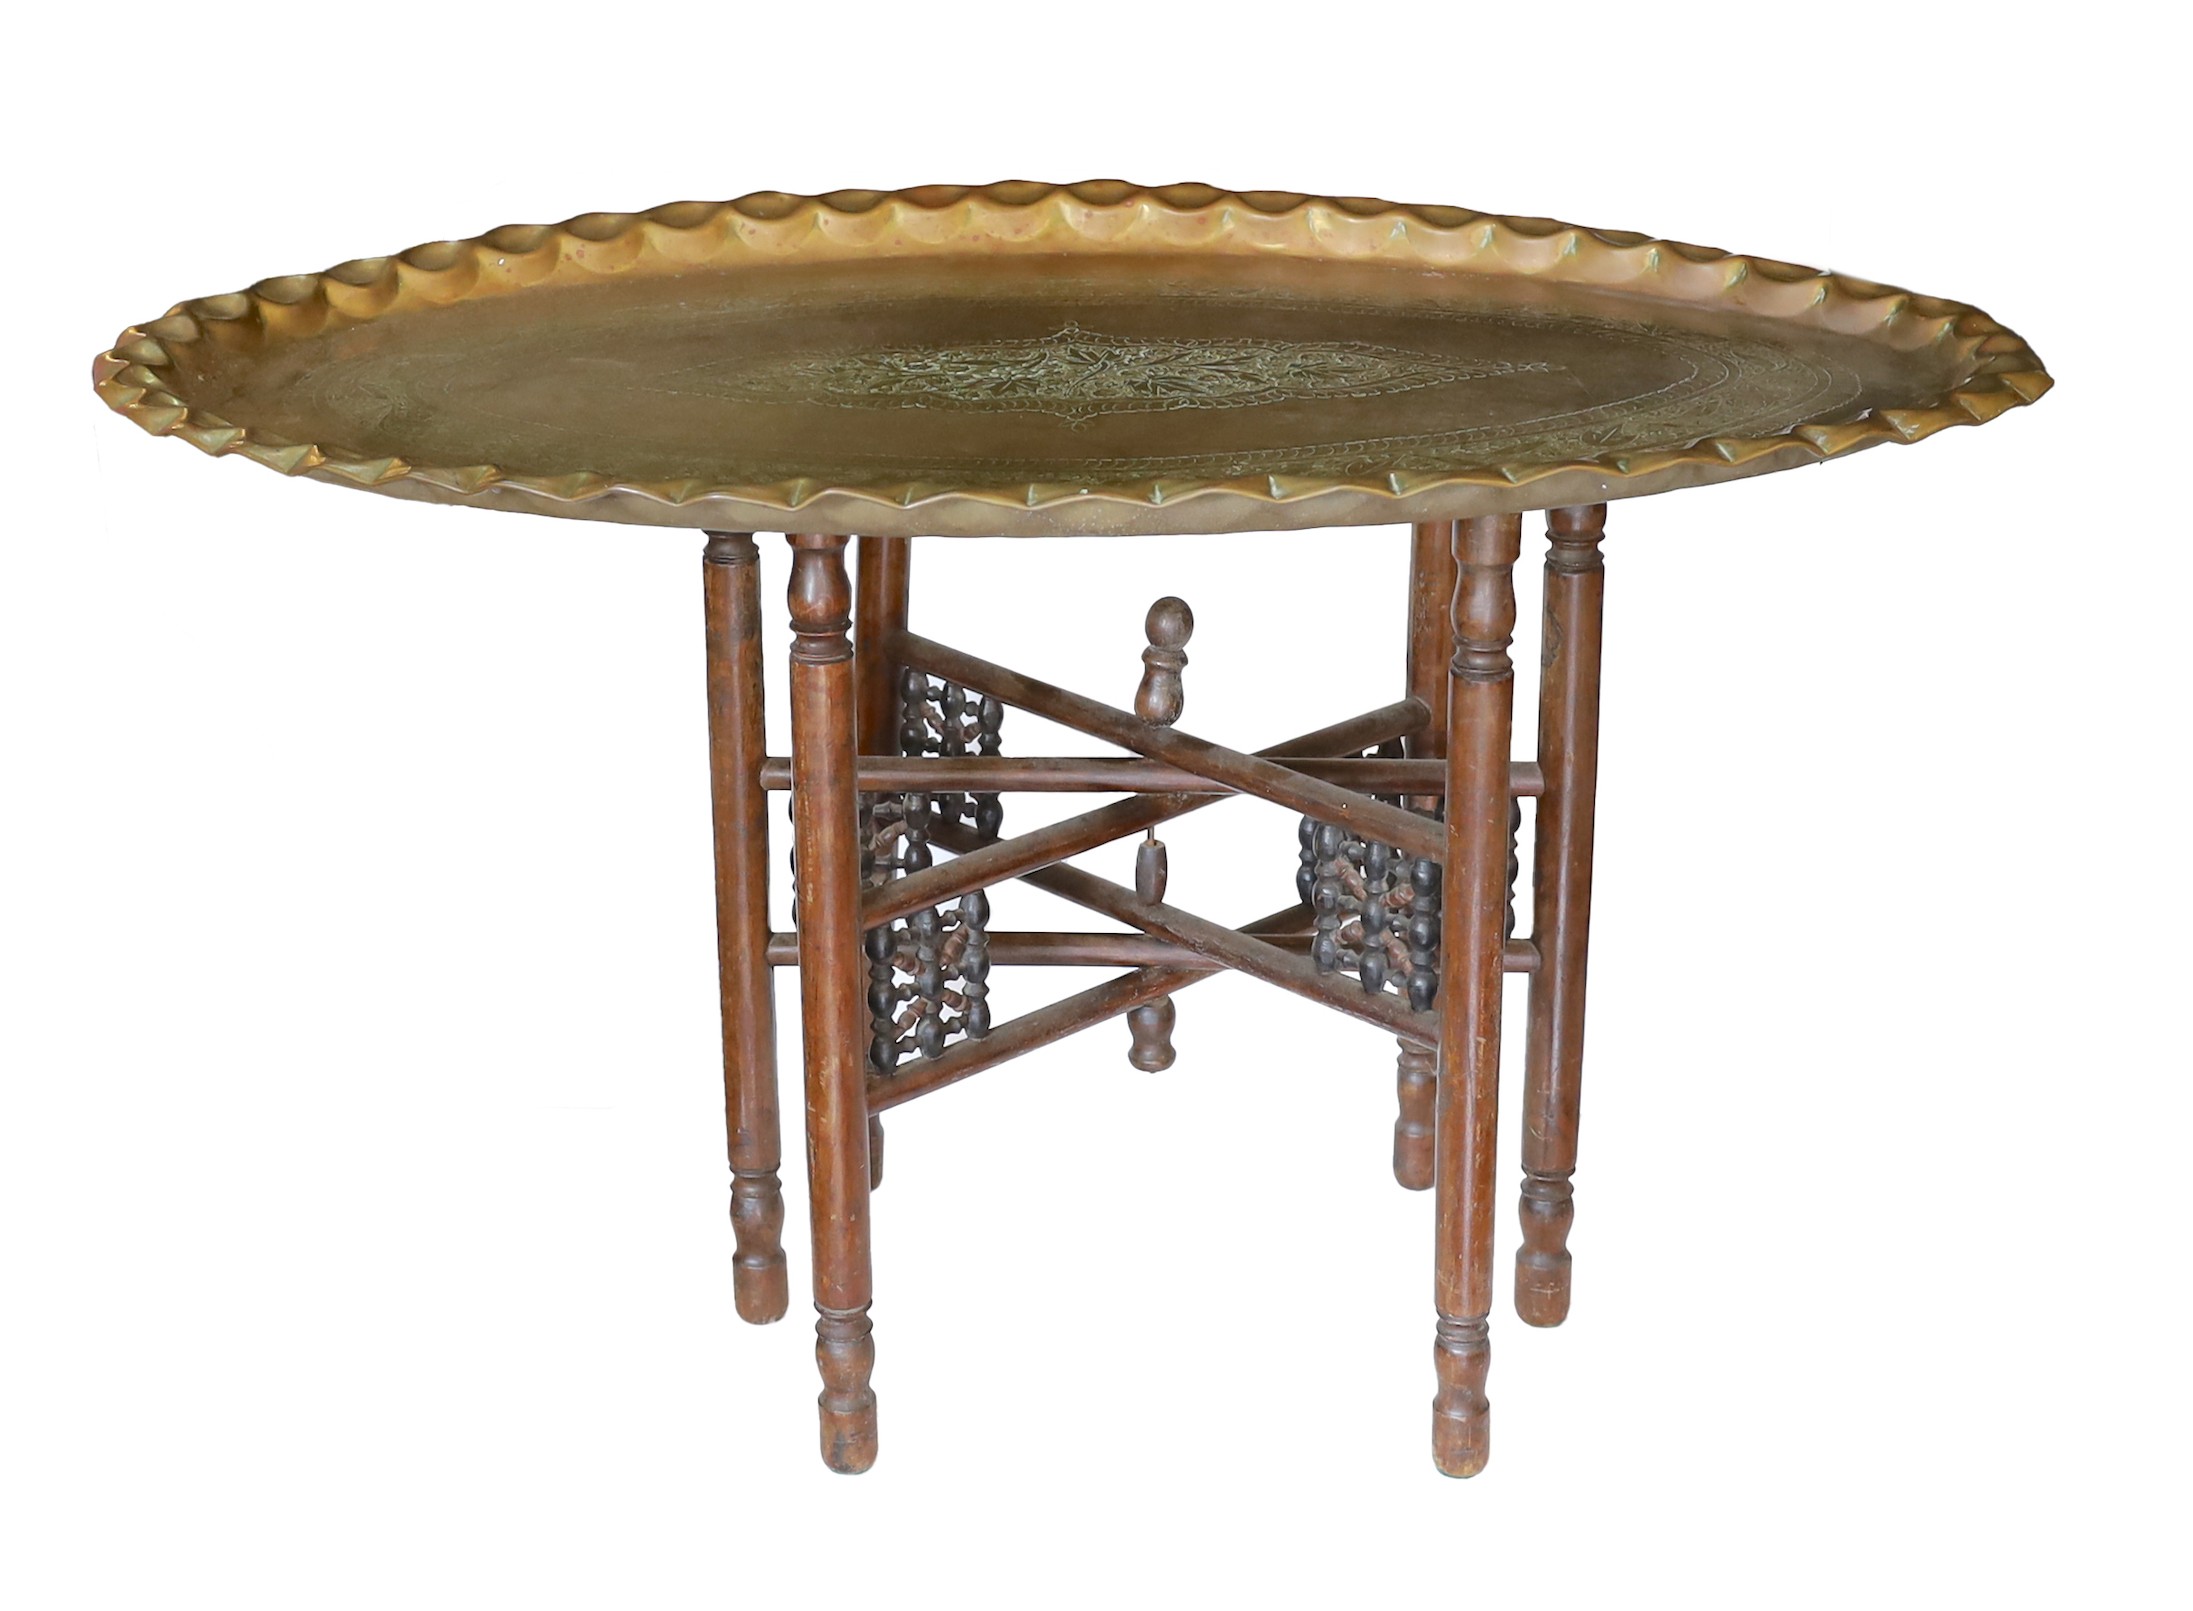 An unusually large early 20th century Indian brass oval tray top table with folding wooden underframe, 100 x 65cm. height 55cm                                                                                              